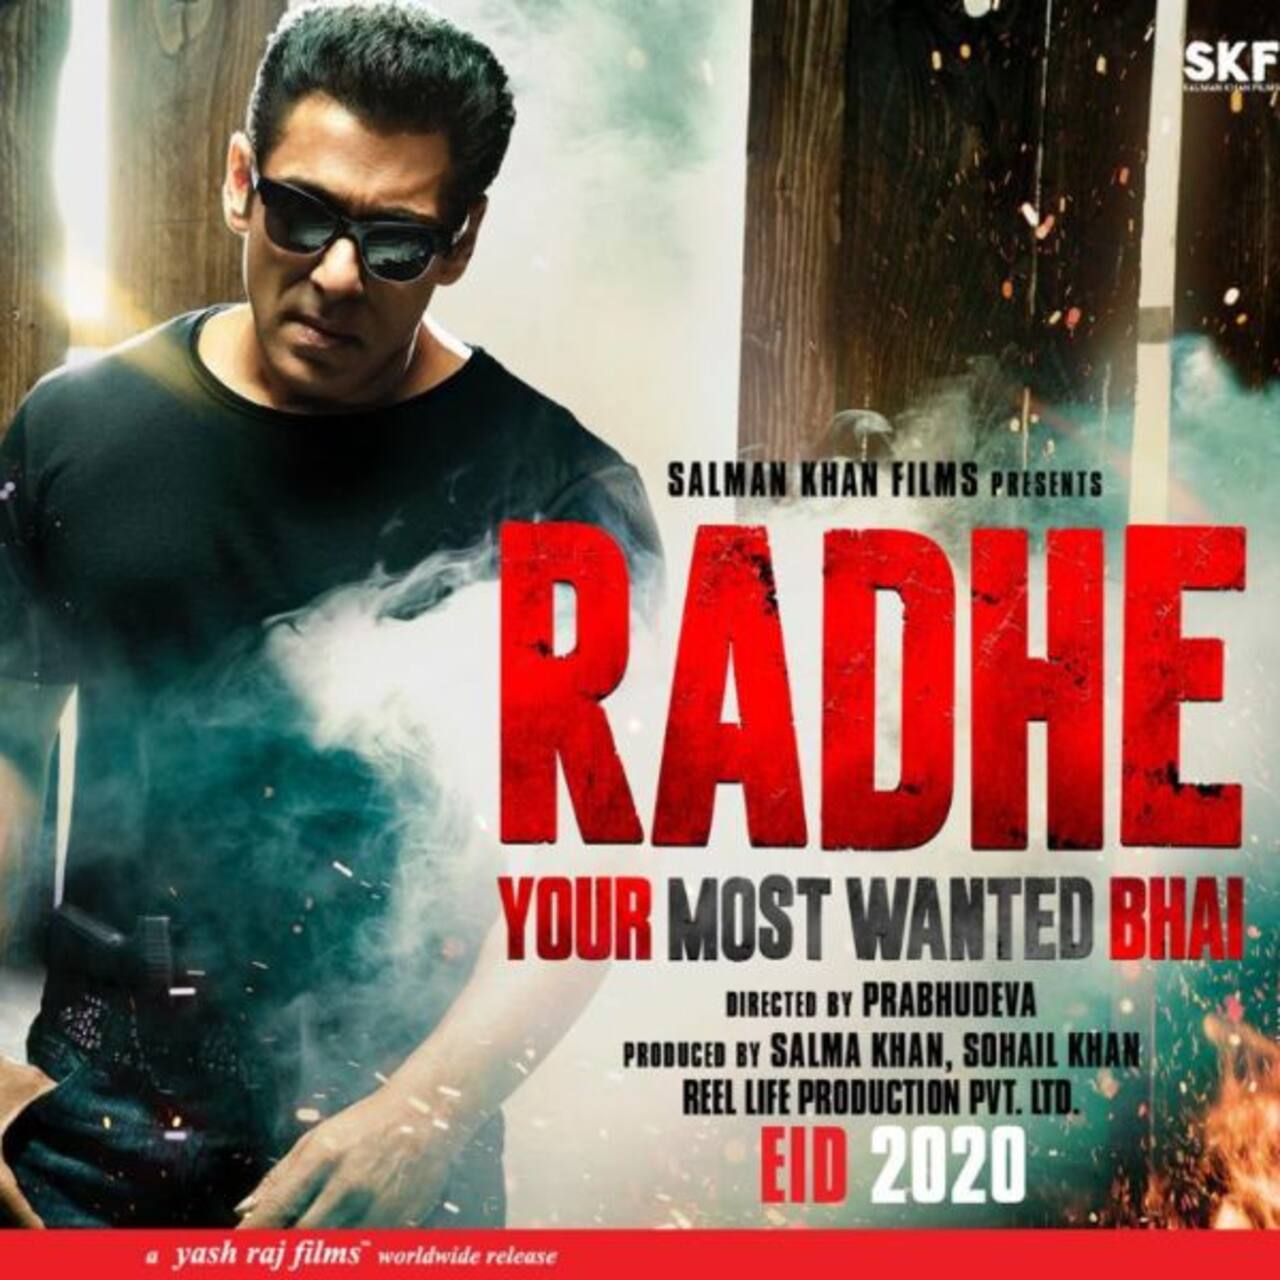 Radhe Your Most Wanted Bhai: Release date of Salman Khan starrer locked and loaded